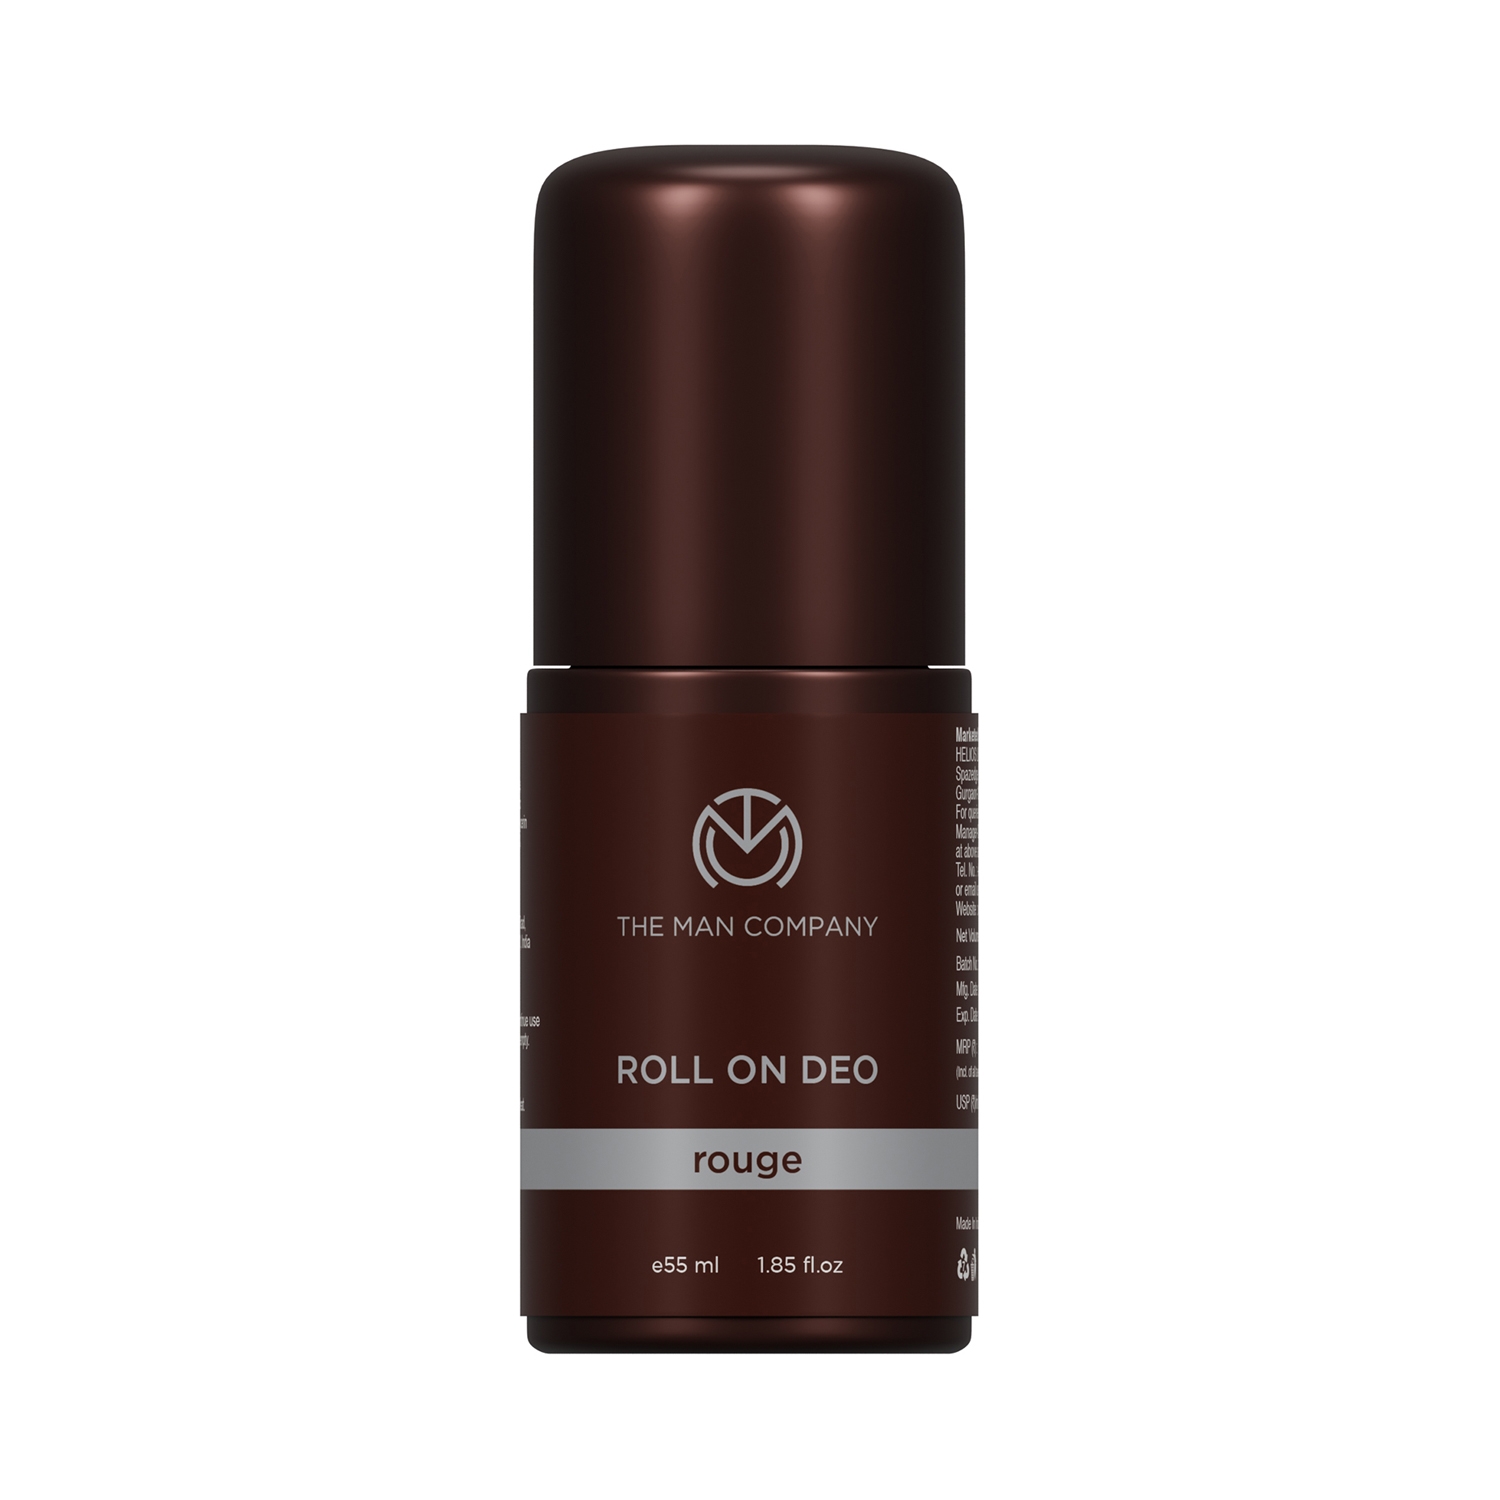 The Man Company | The Man Company Rouge Roll On Deodorant (55ml)